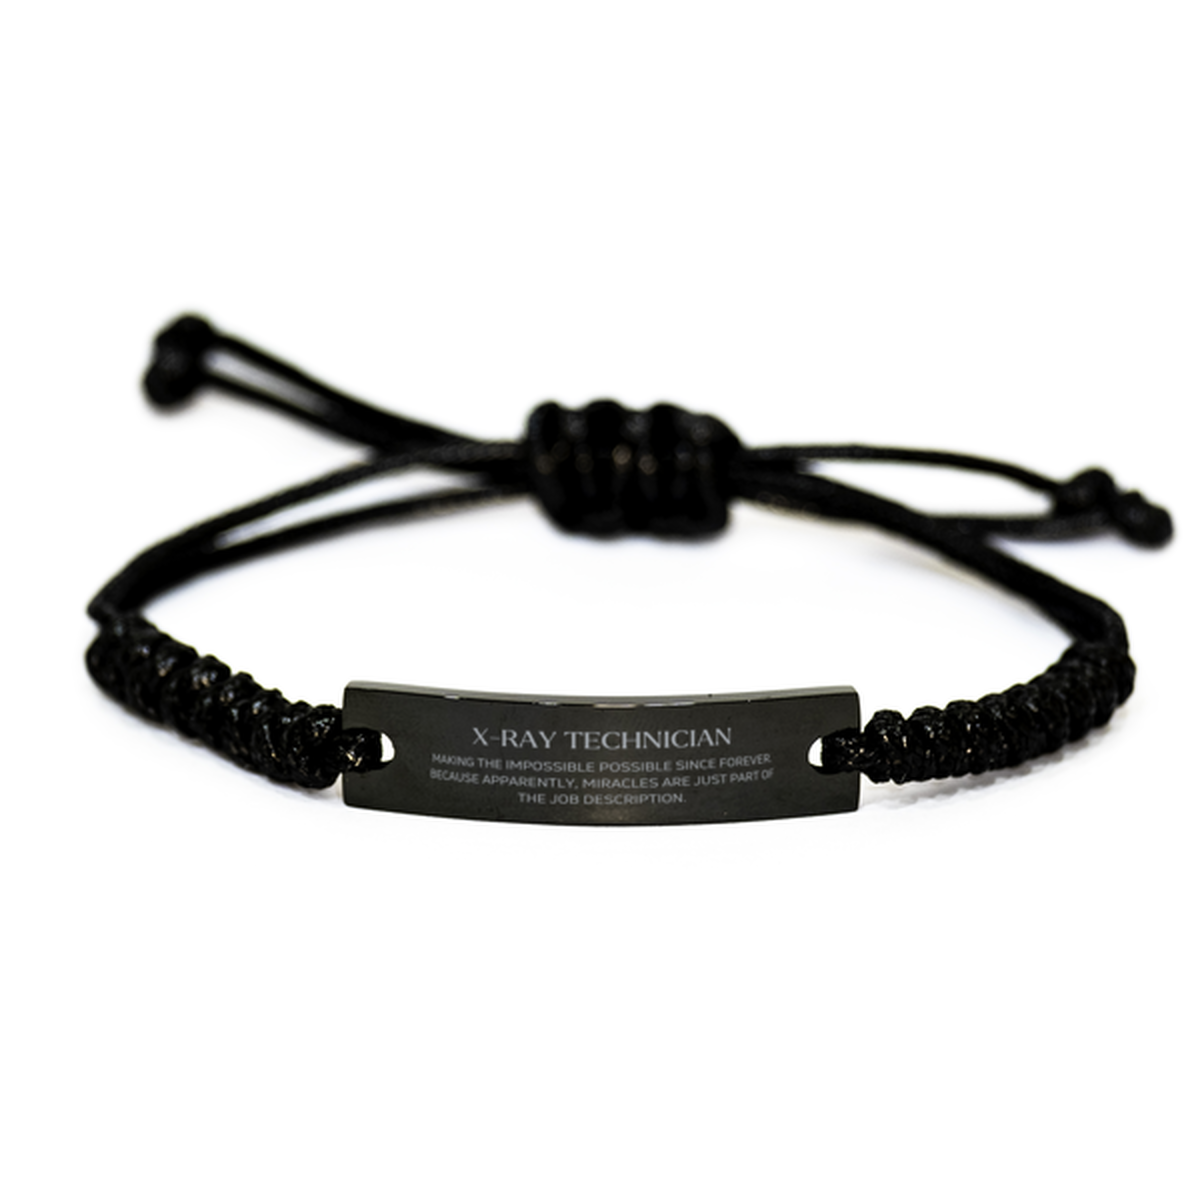 Funny X-Ray Technician Gifts, Miracles are just part of the job description, Inspirational Birthday Black Rope Bracelet For X-Ray Technician, Men, Women, Coworkers, Friends, Boss